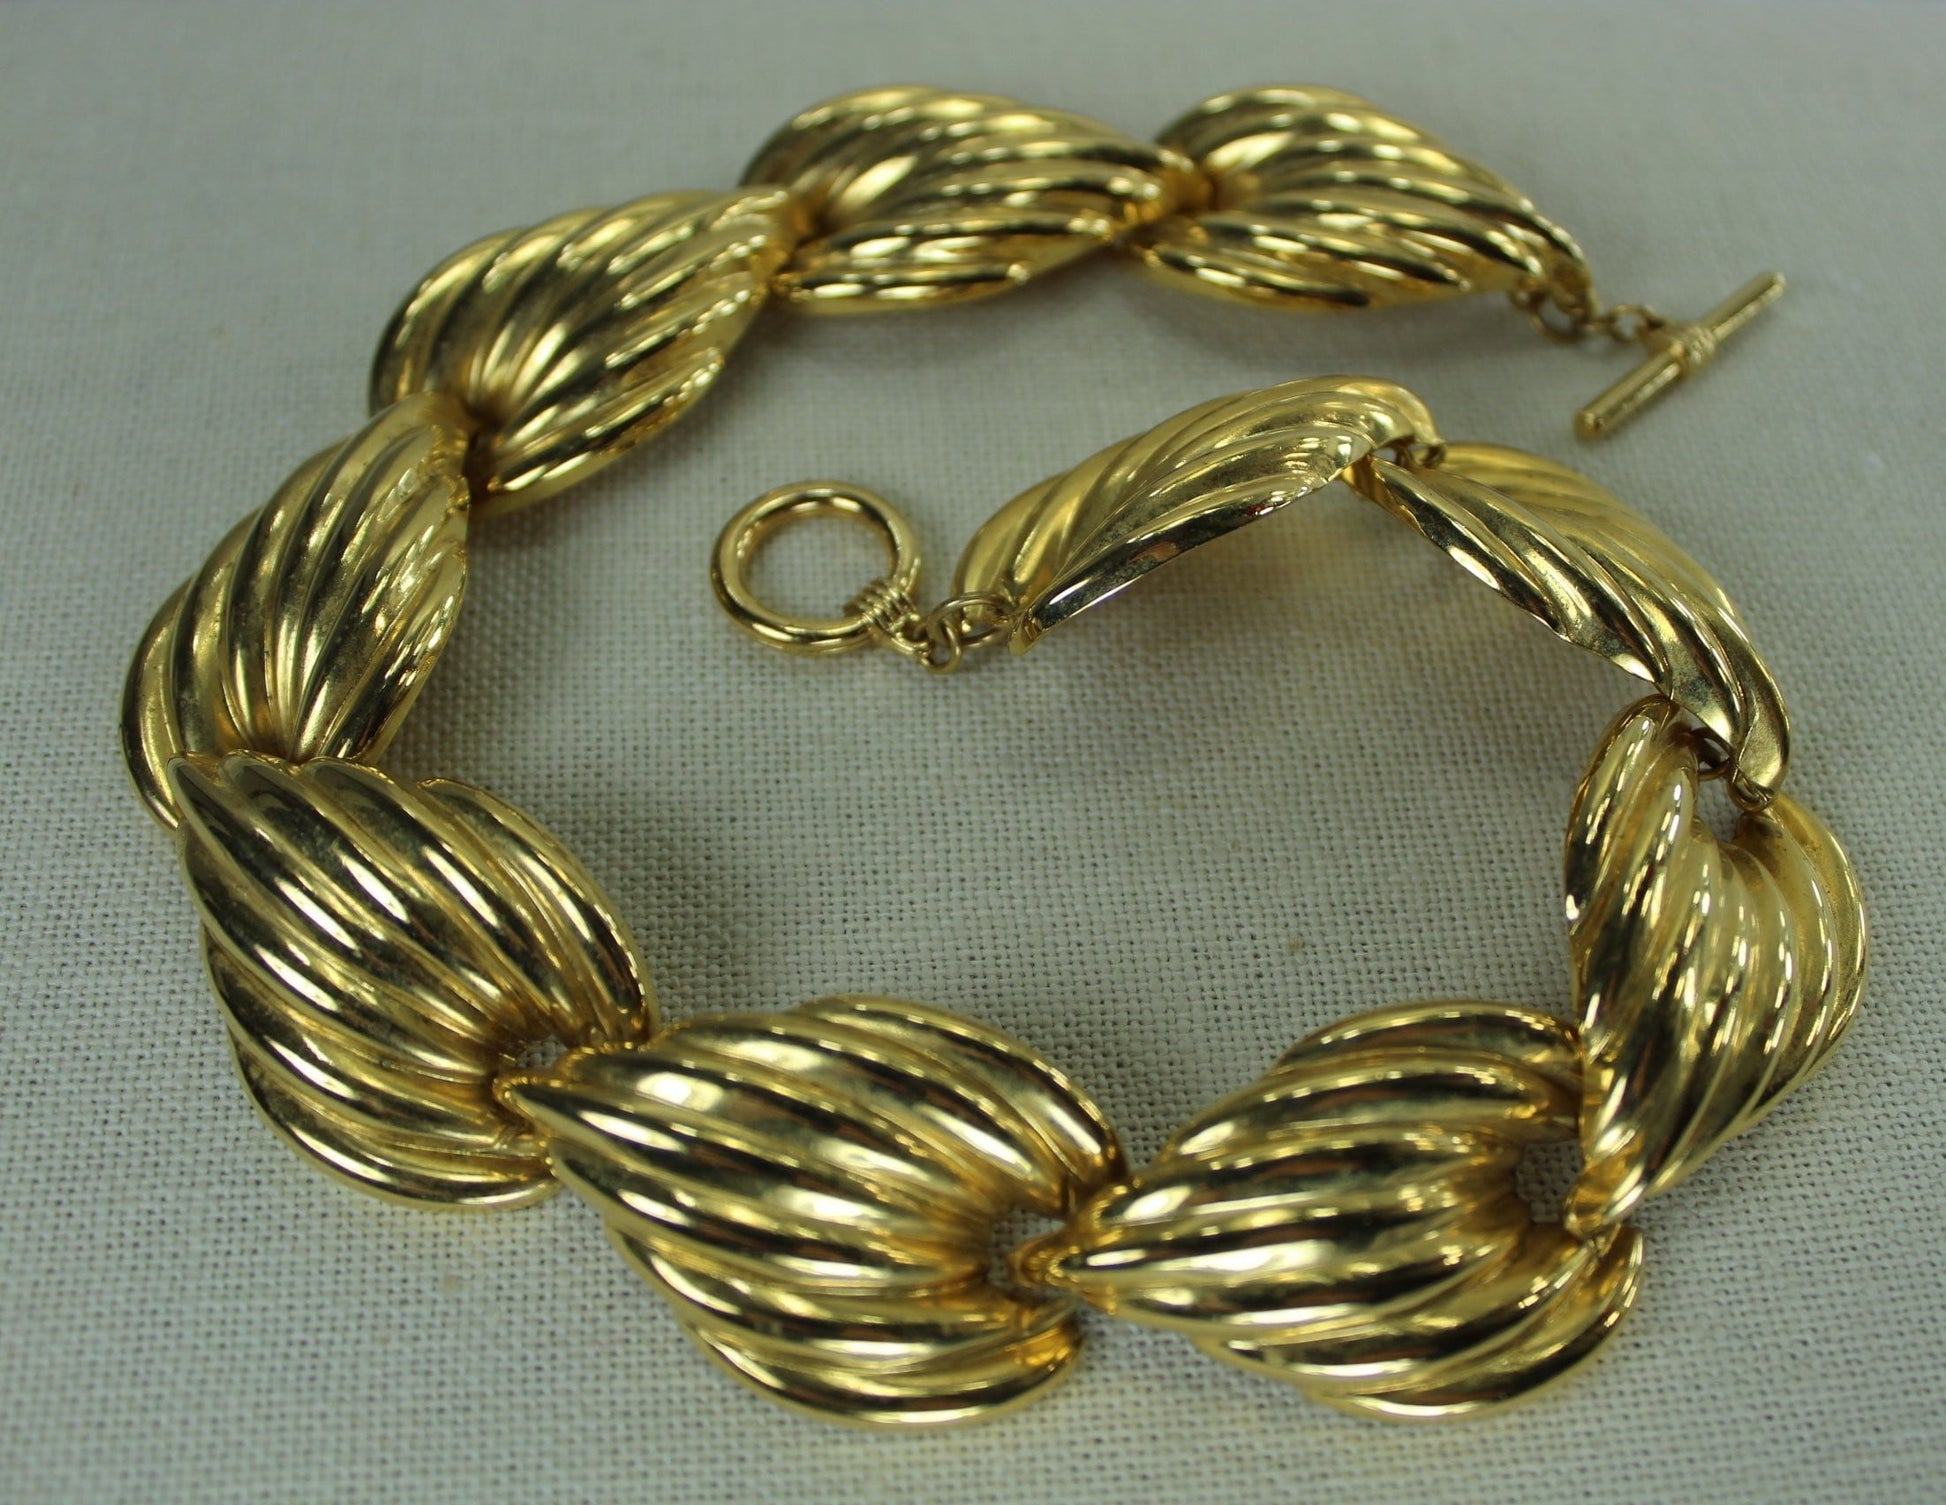 Classic Vintage Choker Gold Metal Leaves Necklace Large Showy Dimensional 1970s toggle close